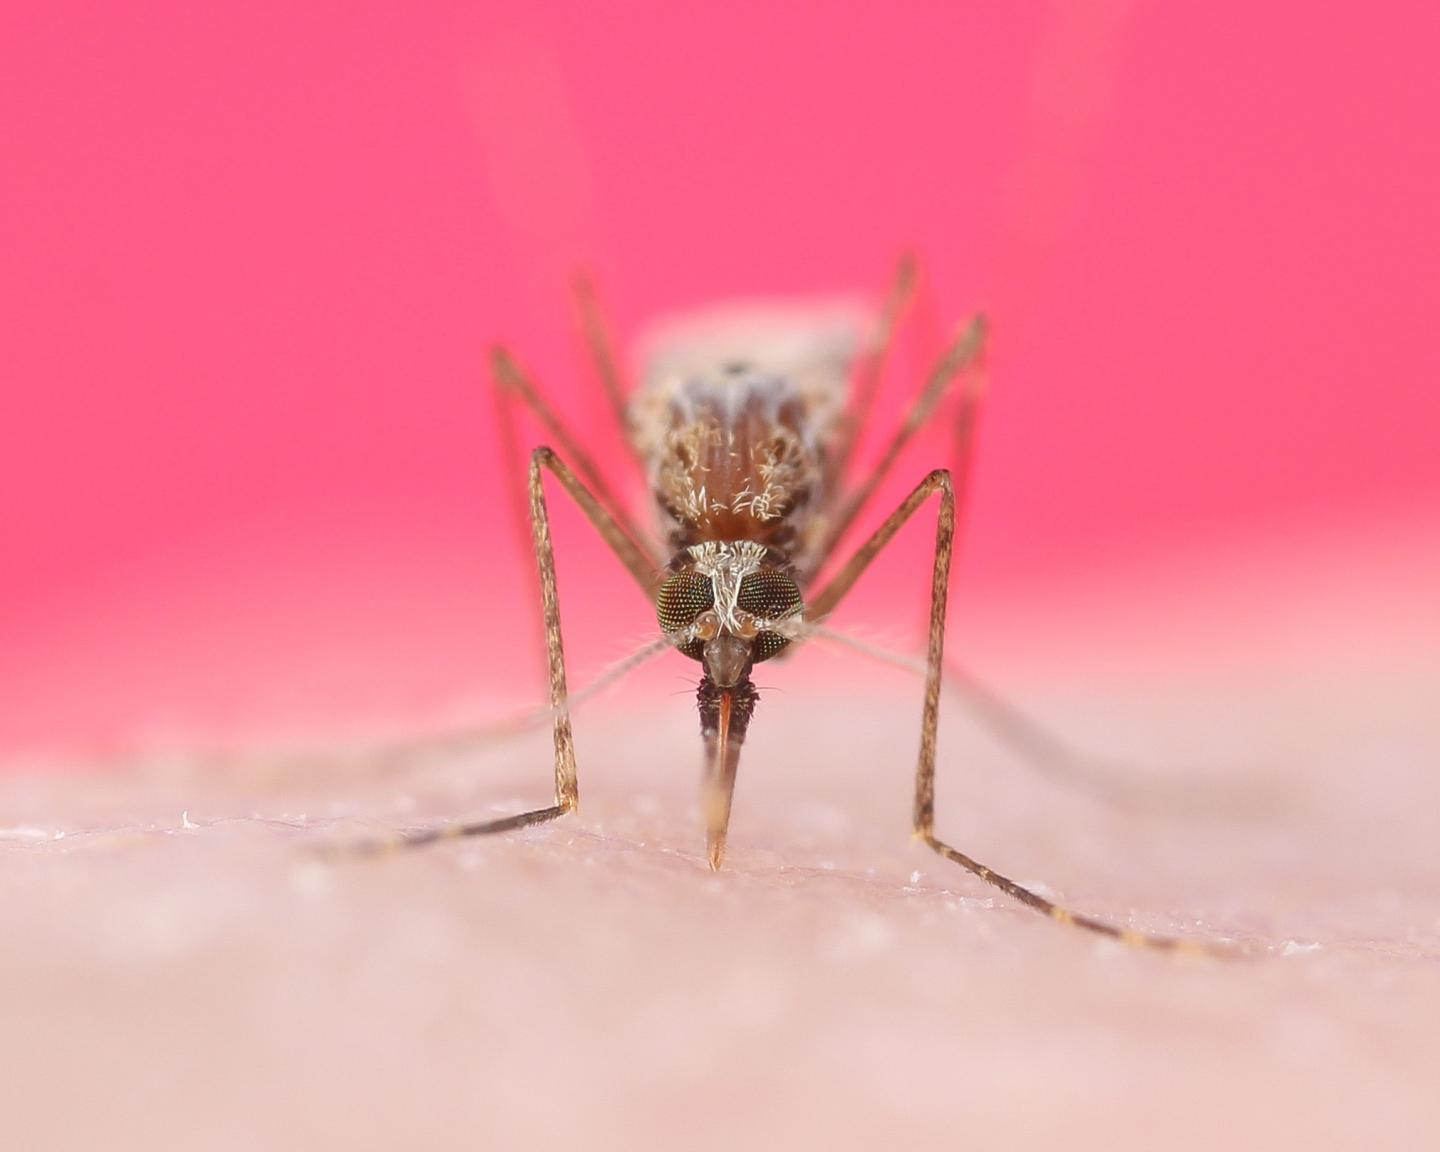 Research Looks at Sensory Cues to Keep Mosquitoes from Biting Humans